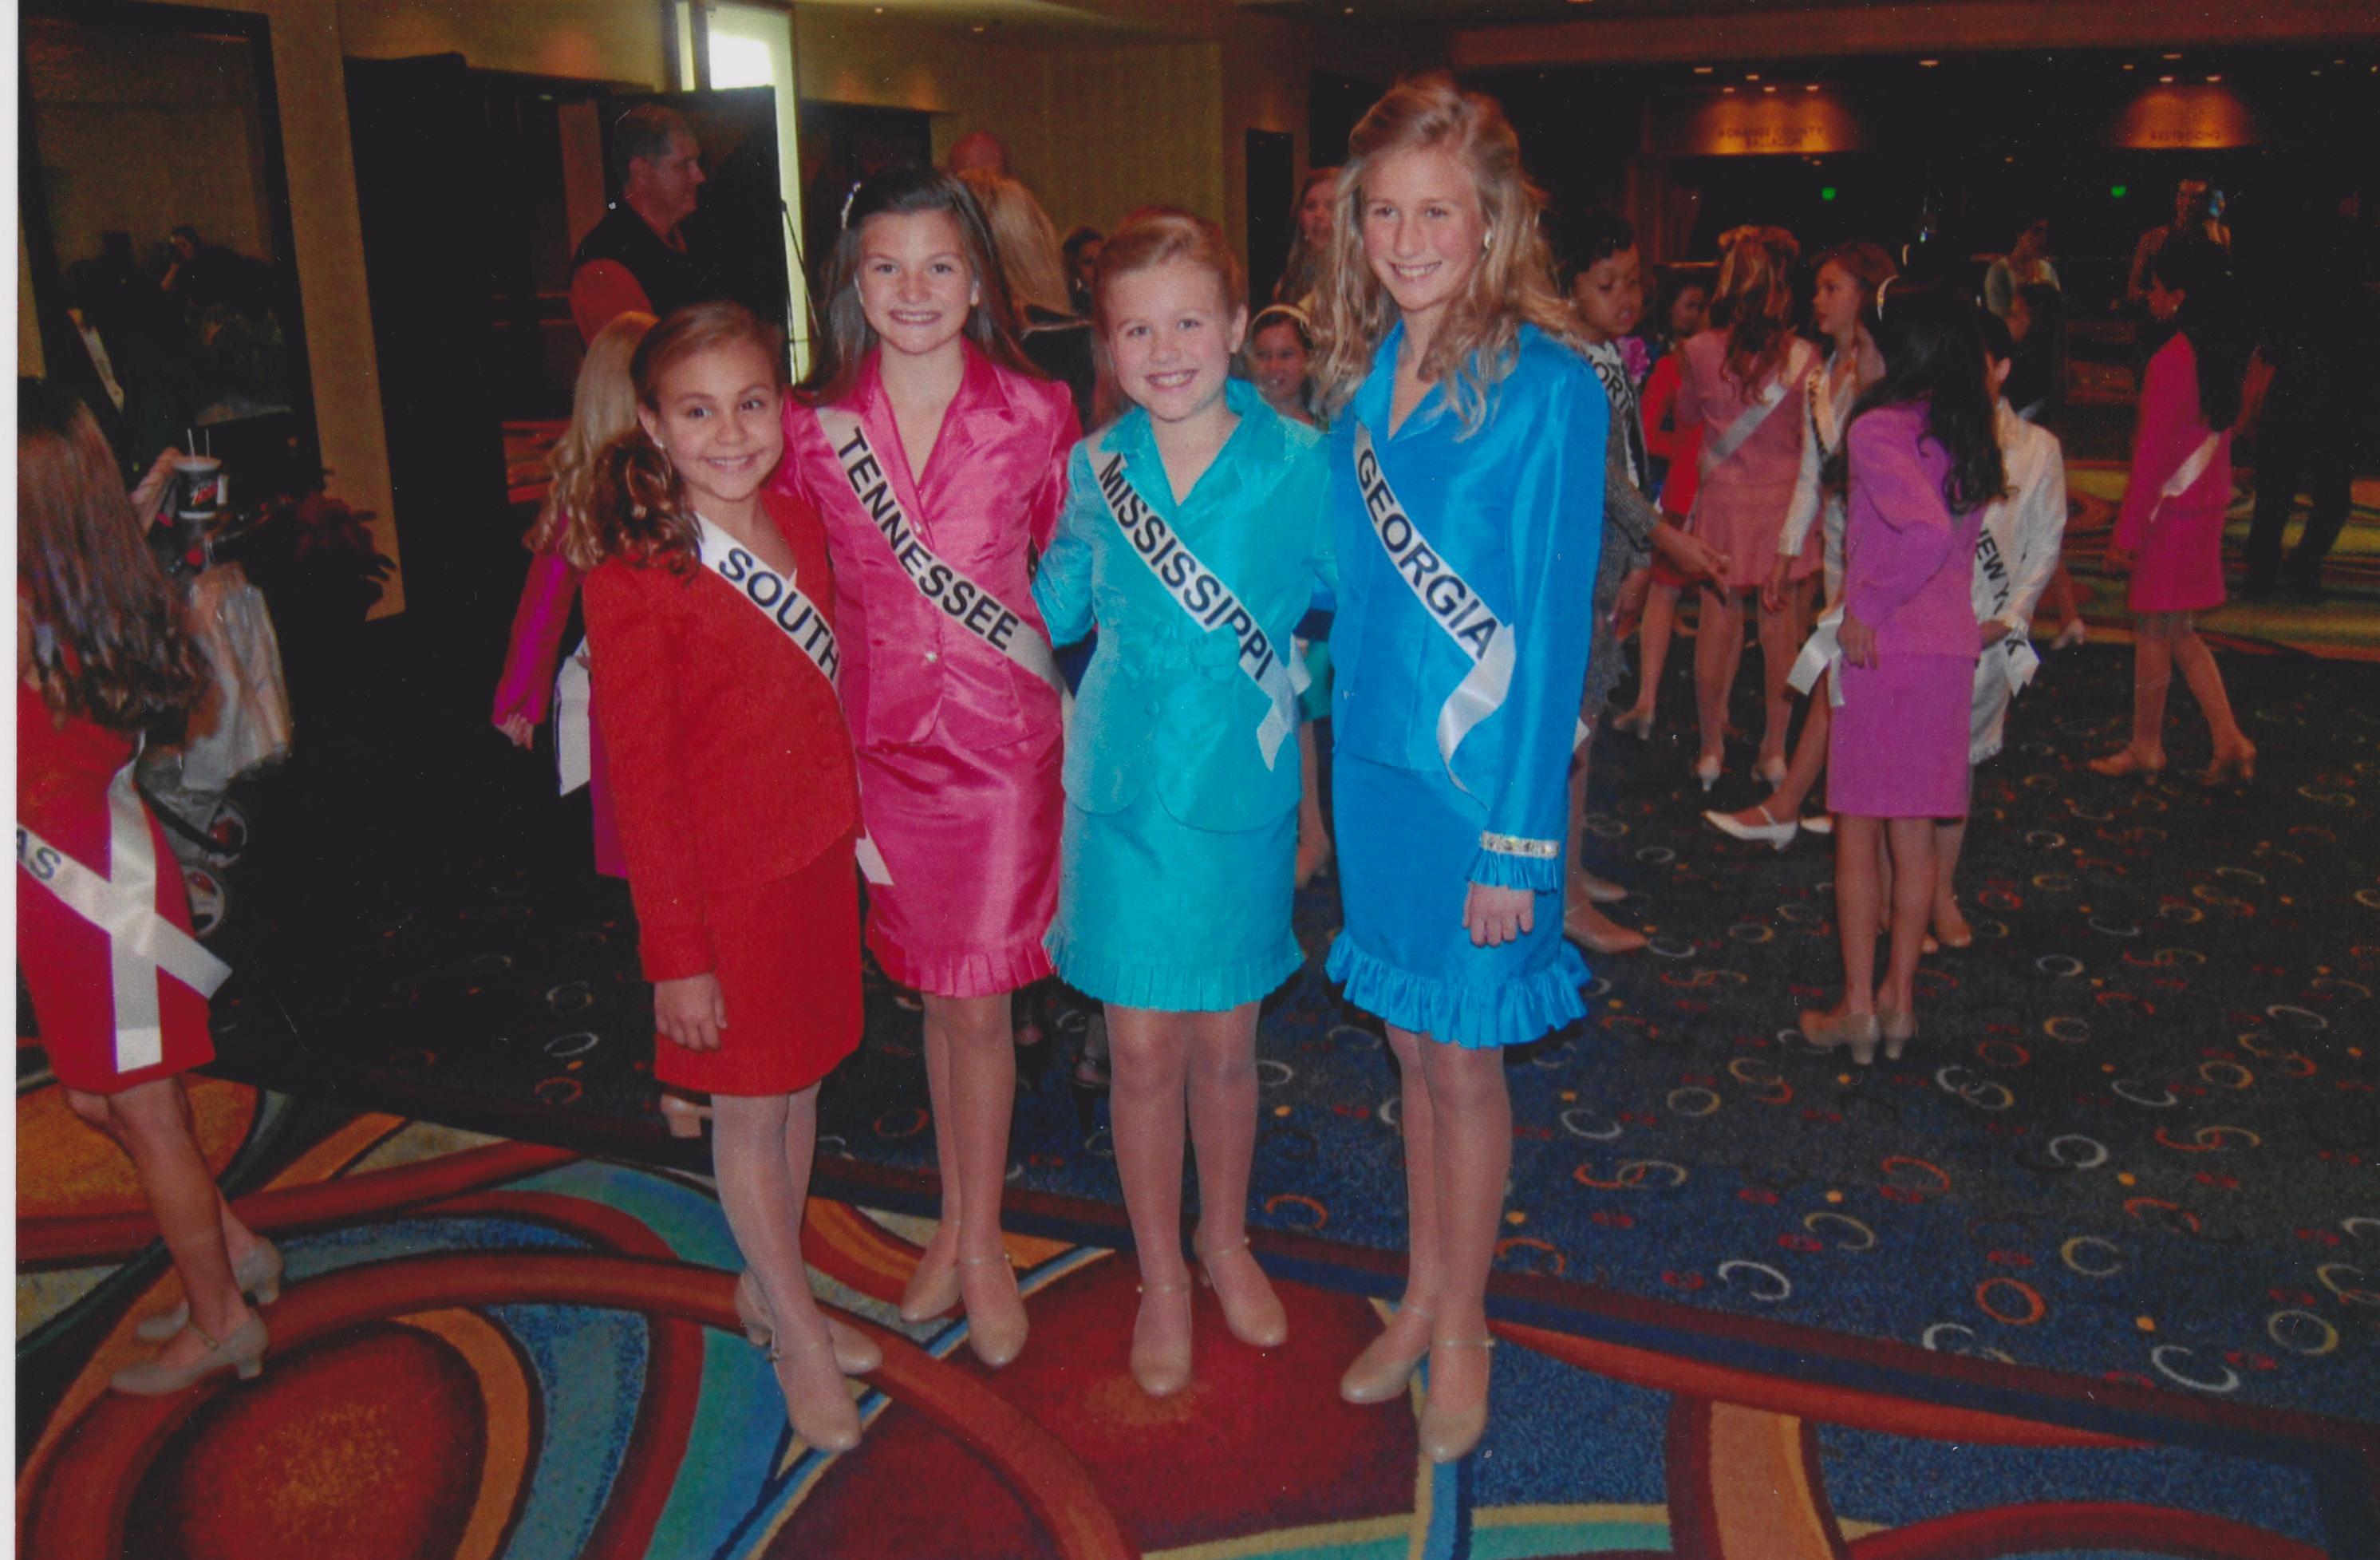 miss tennessee jr pre teen parsons national pageant friends 001_crop.